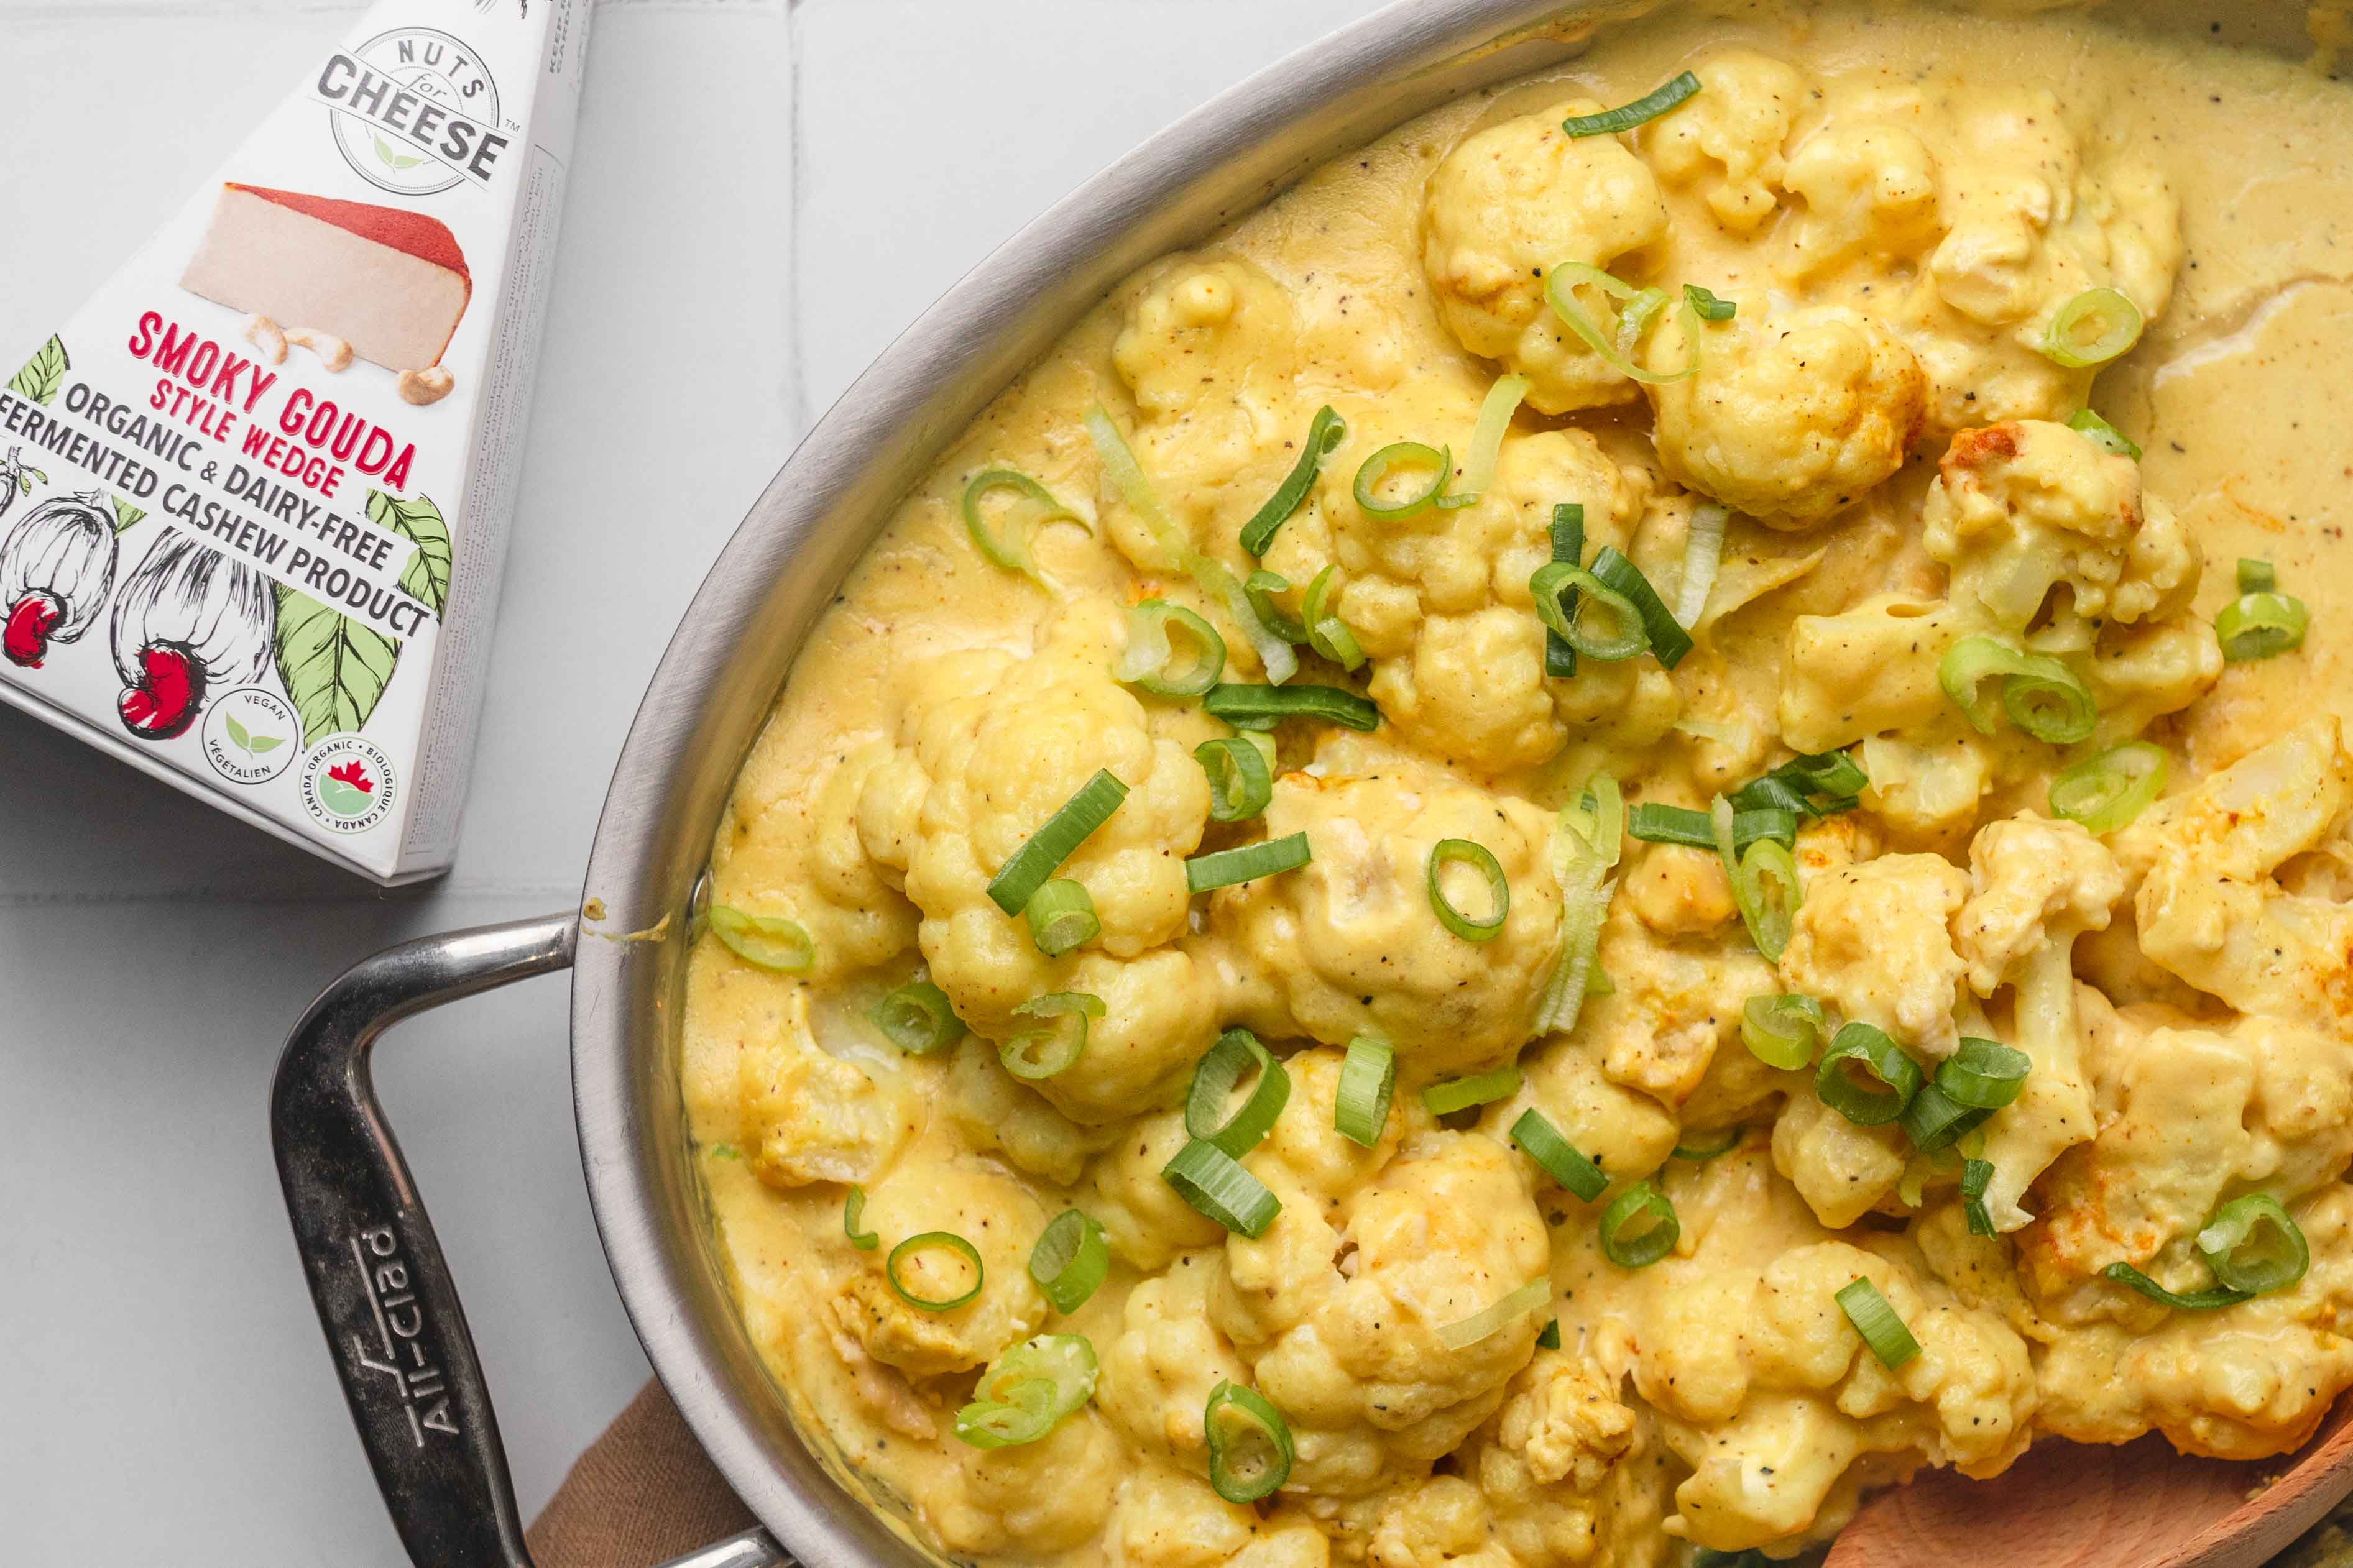 Pan filled with baked cauliflower in a dairy-free cheese sauce. Set next to a box of dairy-free gouda cheese.